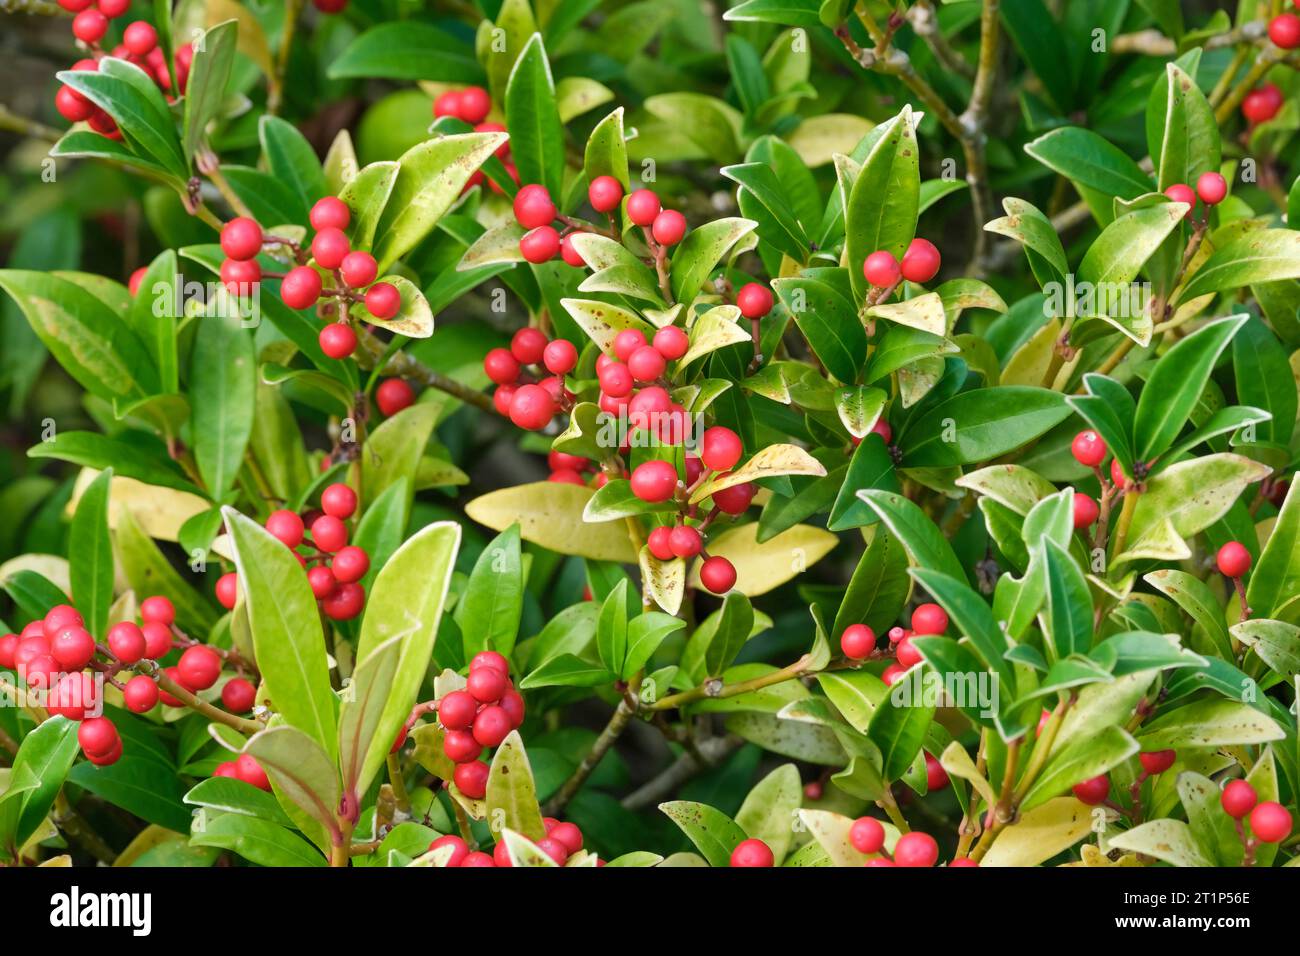 Skimmia japonica Red Princess, Japanese skimmia autumn display of red berries Stock Photo